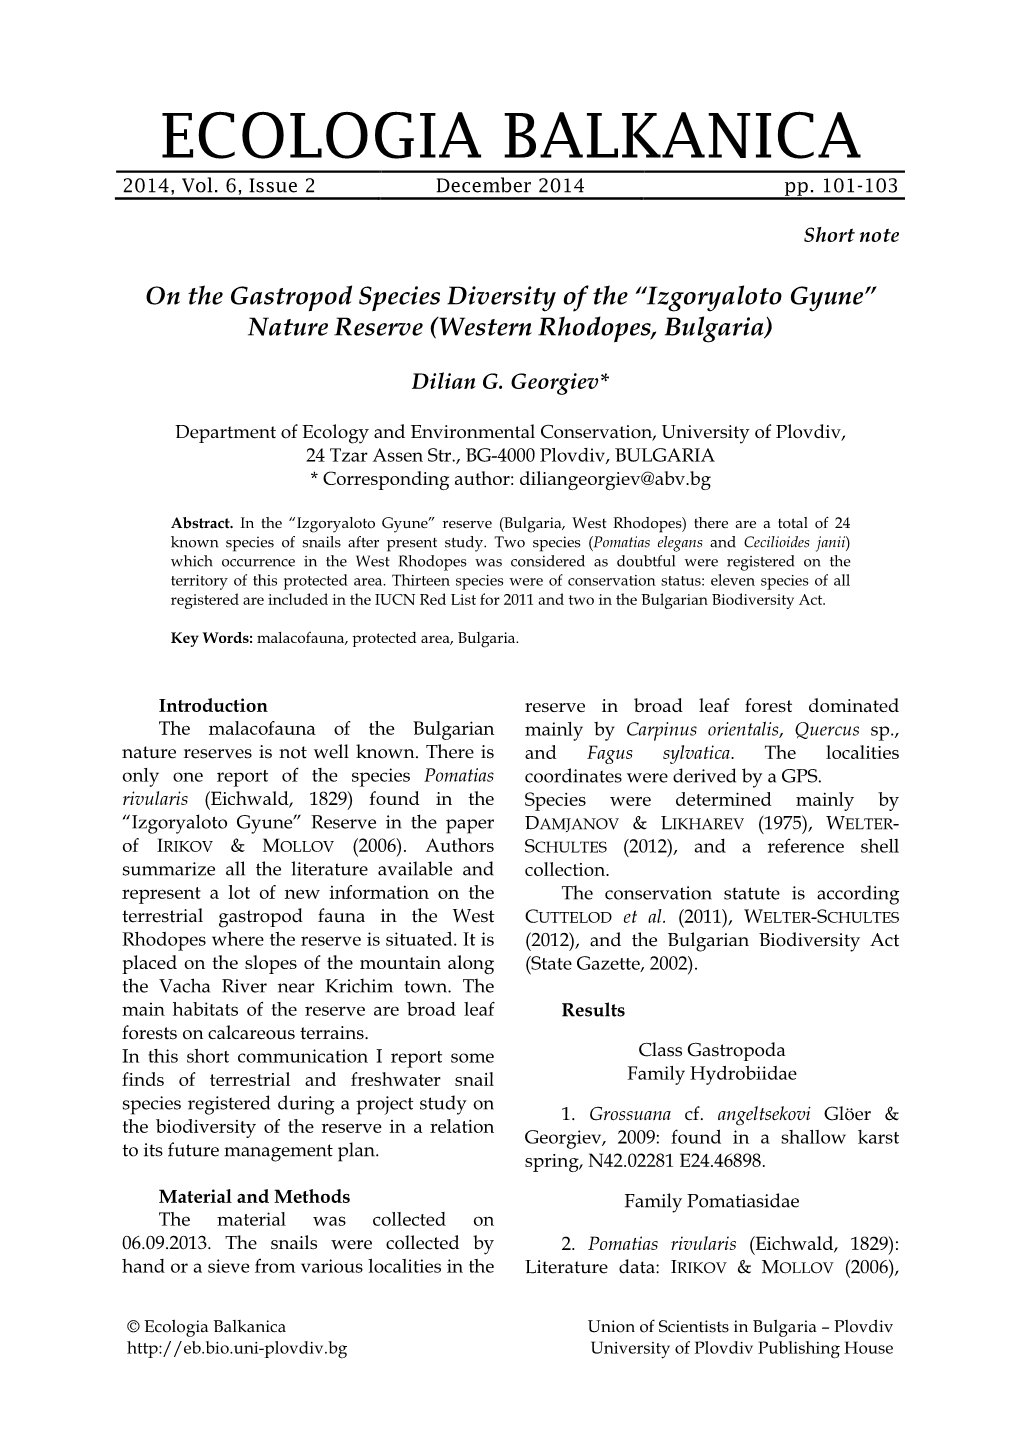 On the Gastropod Species Diversity of the “Izgoryaloto Gyune” Nature Reserve (Western Rhodopes, Bulgaria)